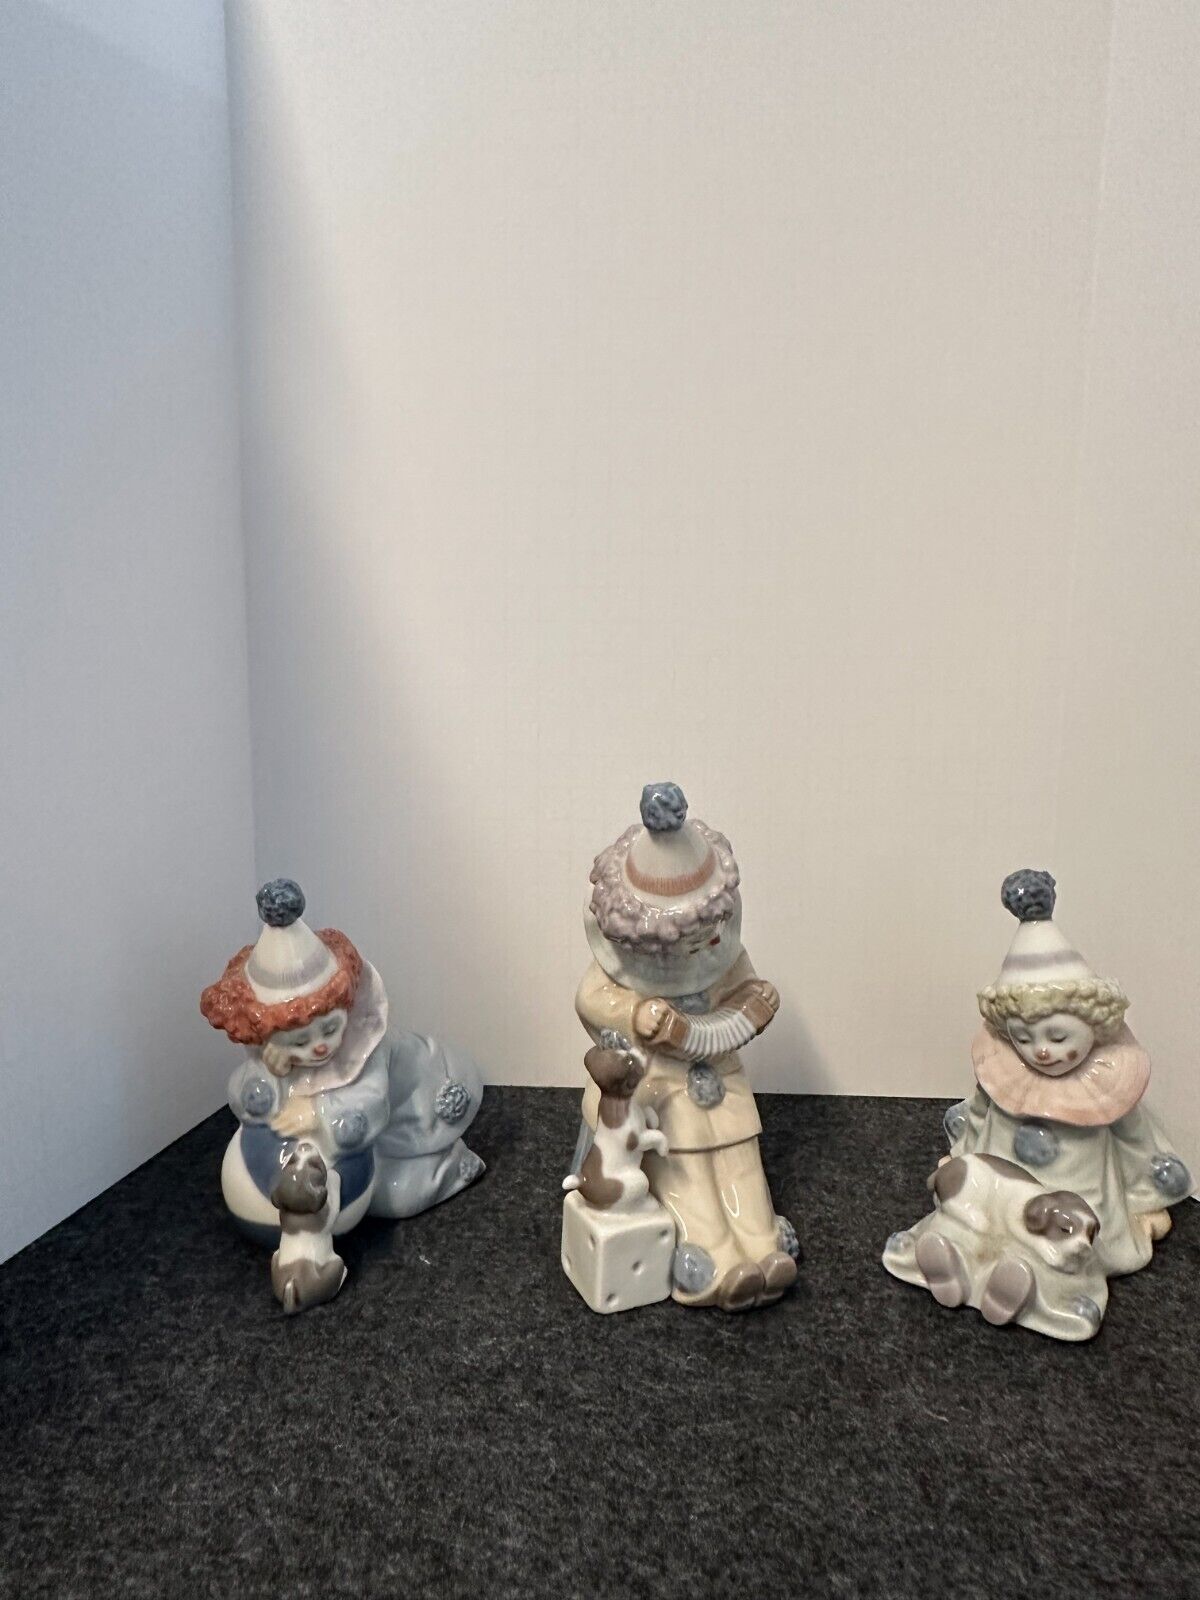 3 X LLADRO SPAIN PIERROT CLOWNS WITH PUPPIES RETIRED. ALL IN MINT CONDITION